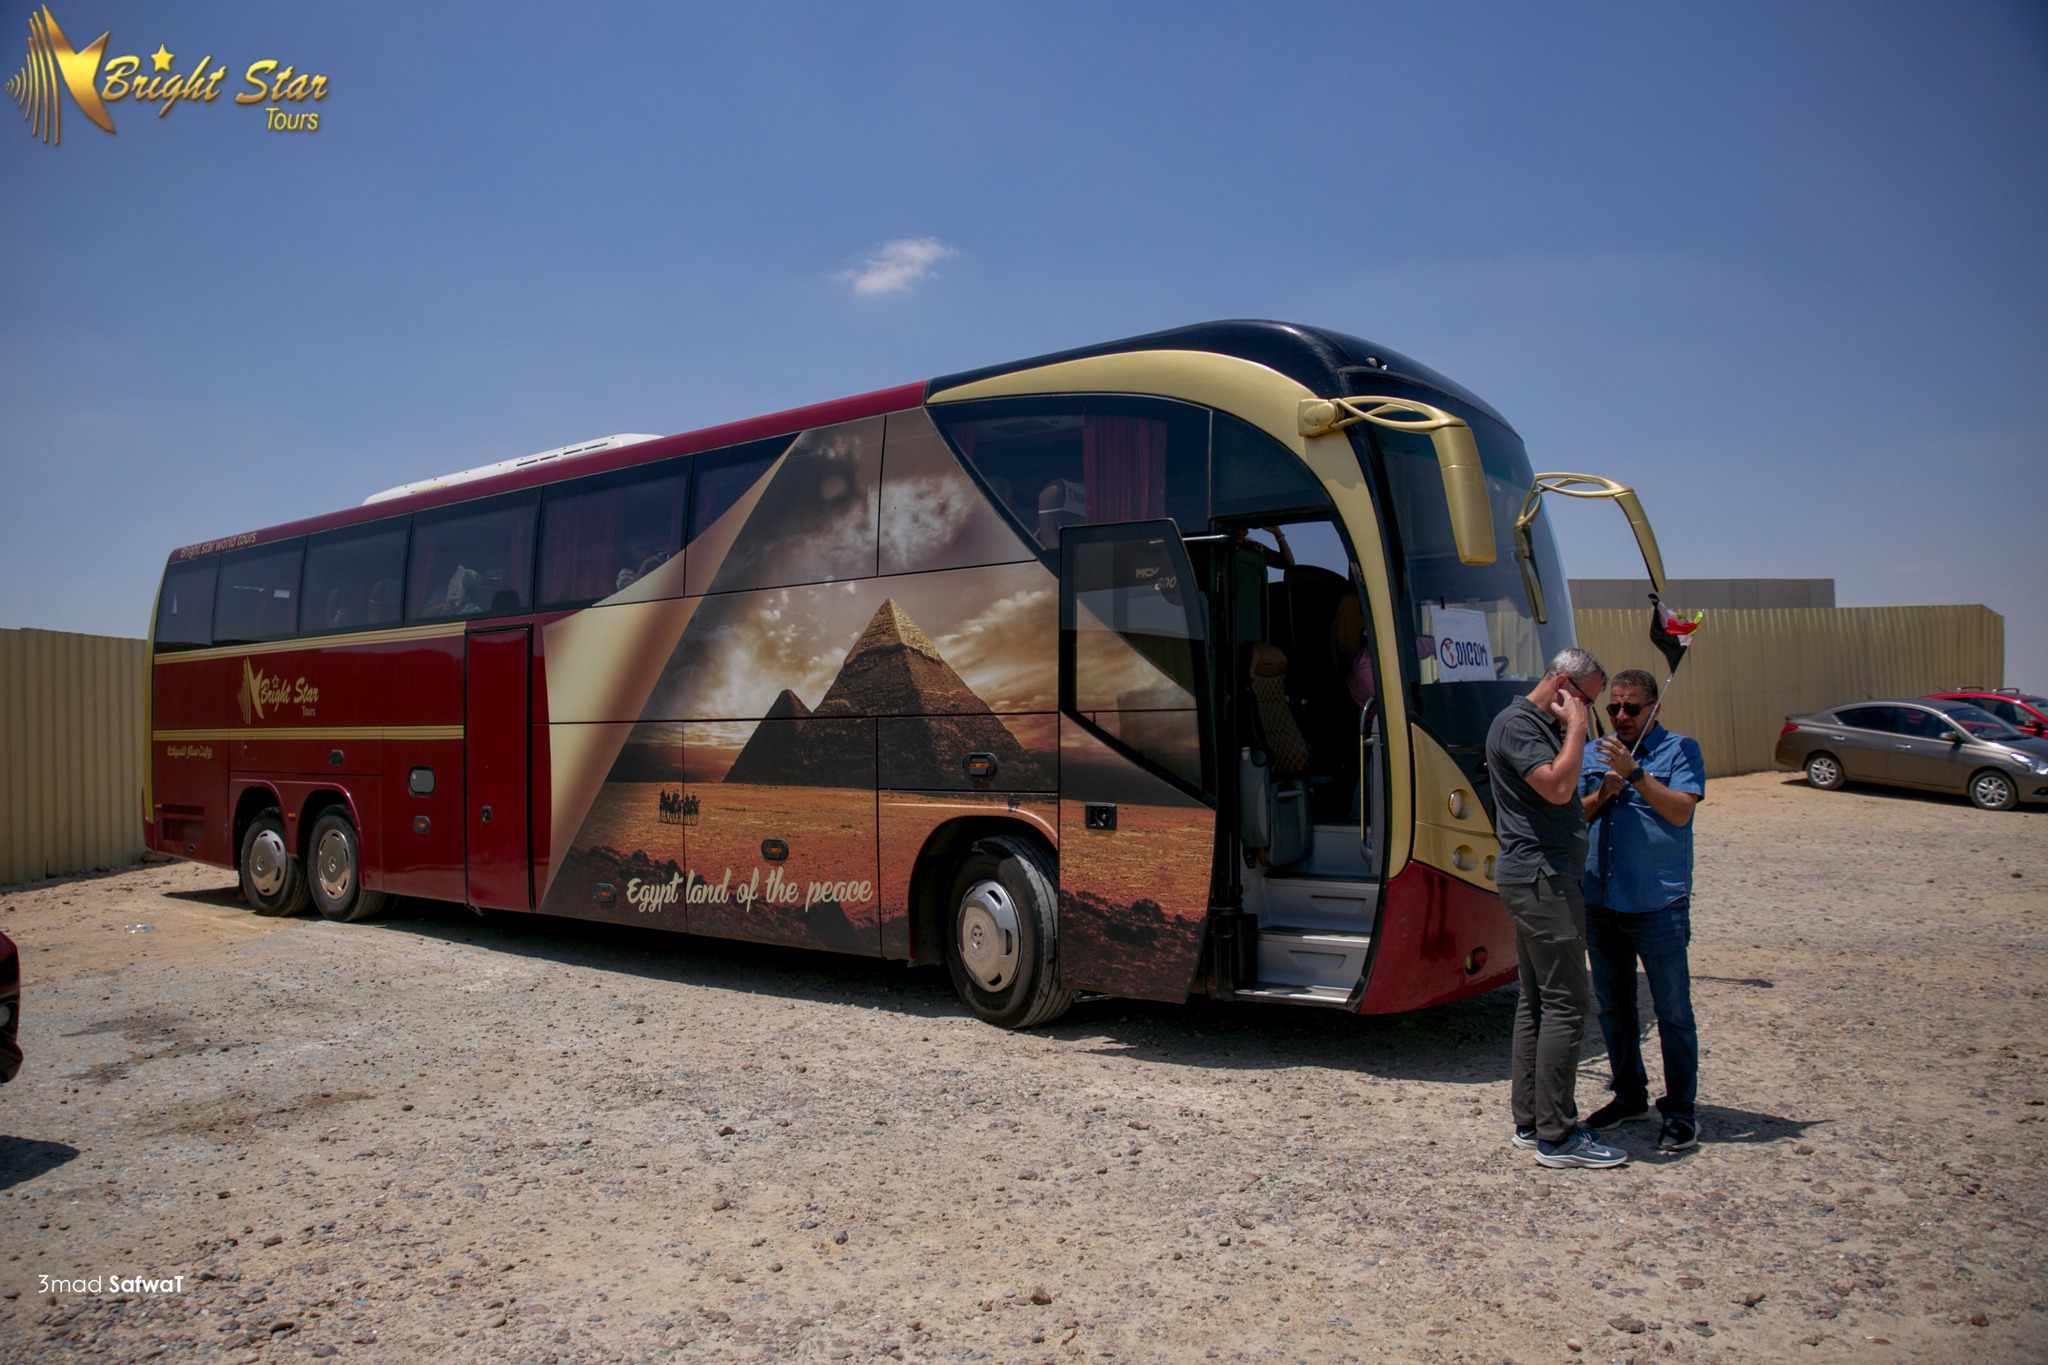 Experience Egypt with Bright Star Tours